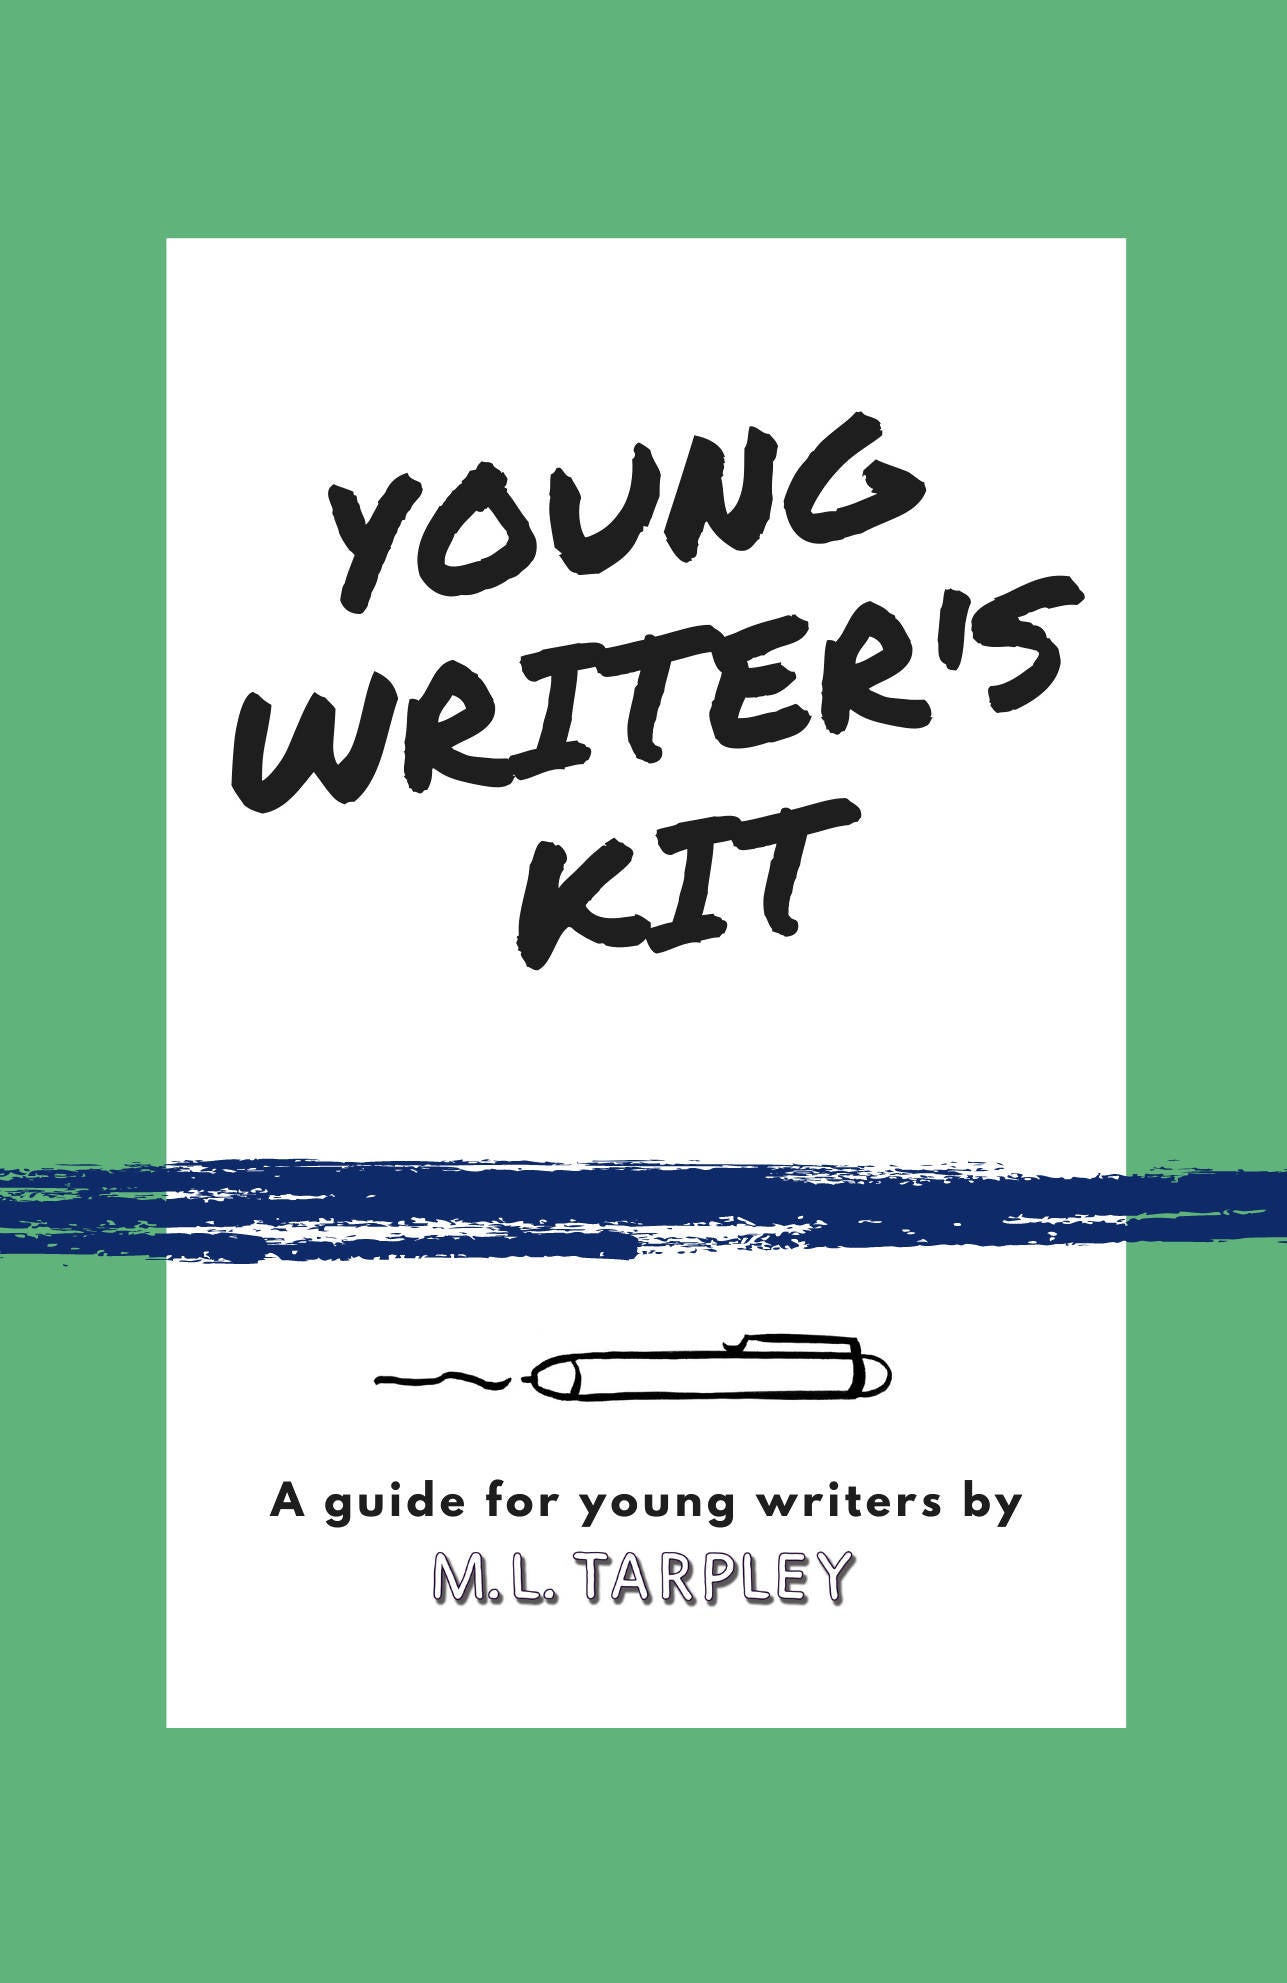 Young Writer's Kit: A Guide for Young Writers